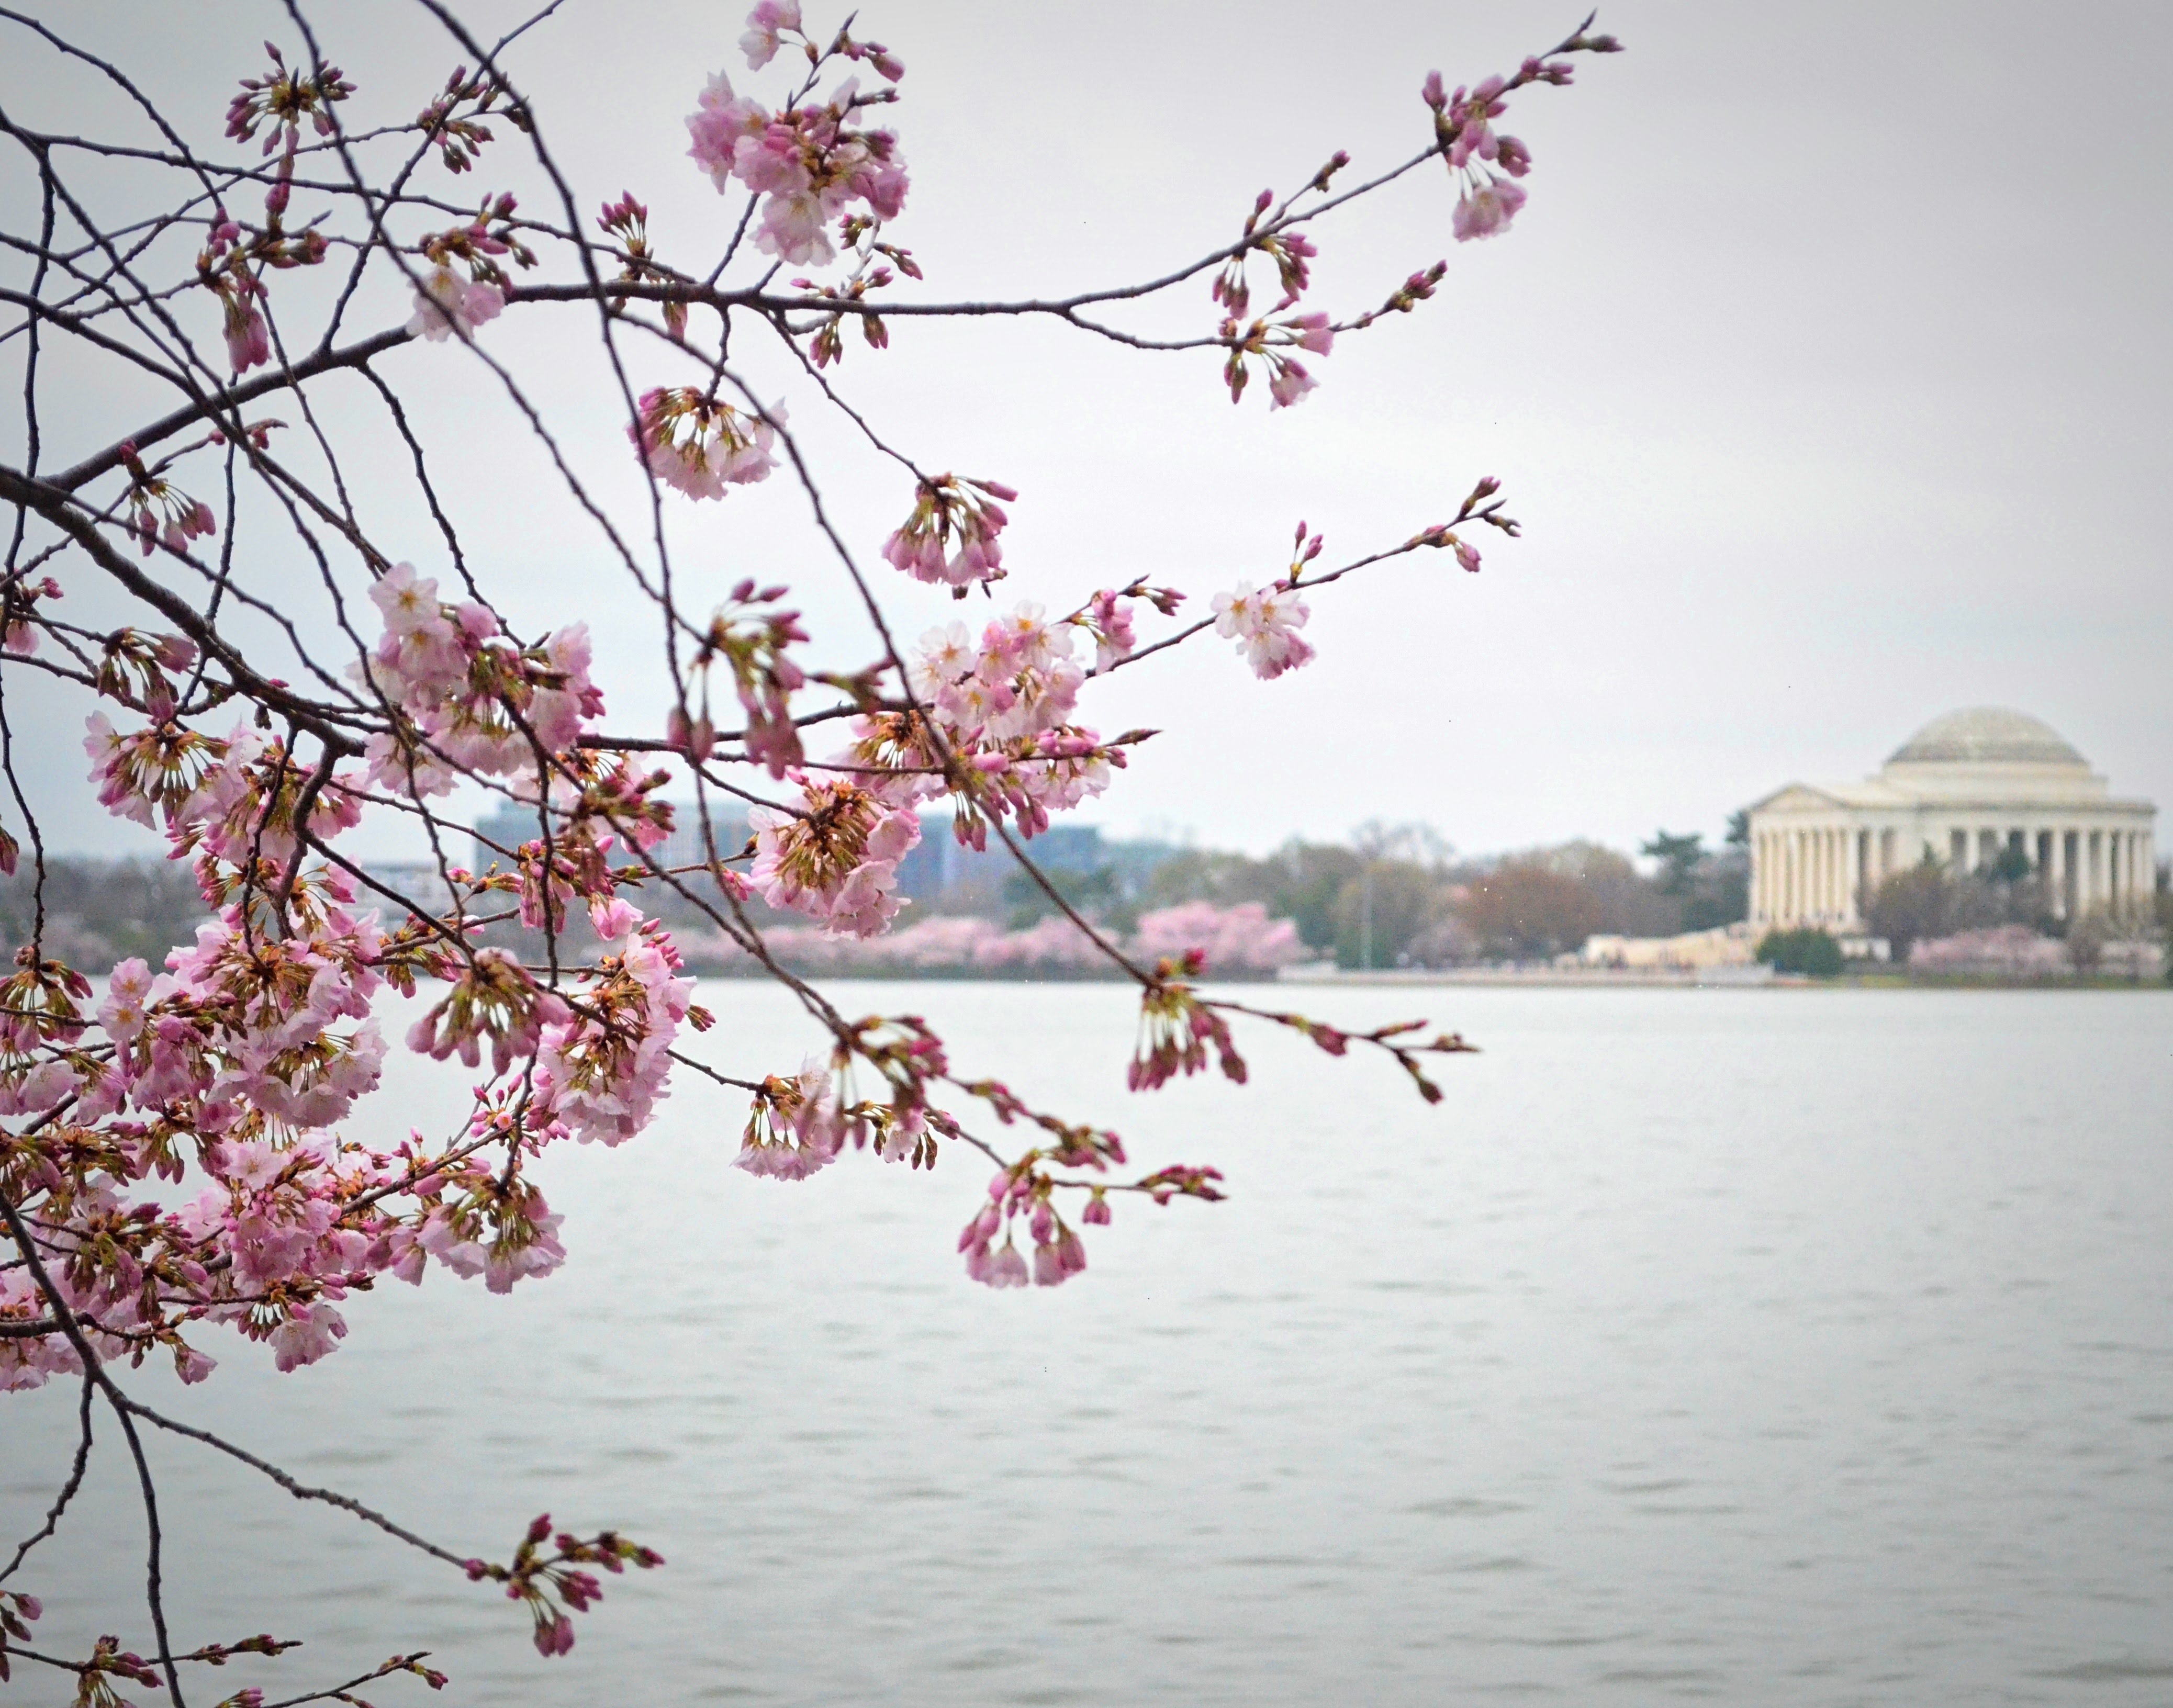 jefferson monument across the river basin with cherry blossoms in the foreground, washington dc, travel photographer, cherry blossoms, travel, travel blogger, japanese cherry blossoms, japan, japanese, travel photography, architectural photography, jefferson monument, jefferson, thomas jefferson, thomas jefferson monument, washington dc monuments, washington dc attractions, washington dc sites, what to see in dc, cherry blossoms in dc,